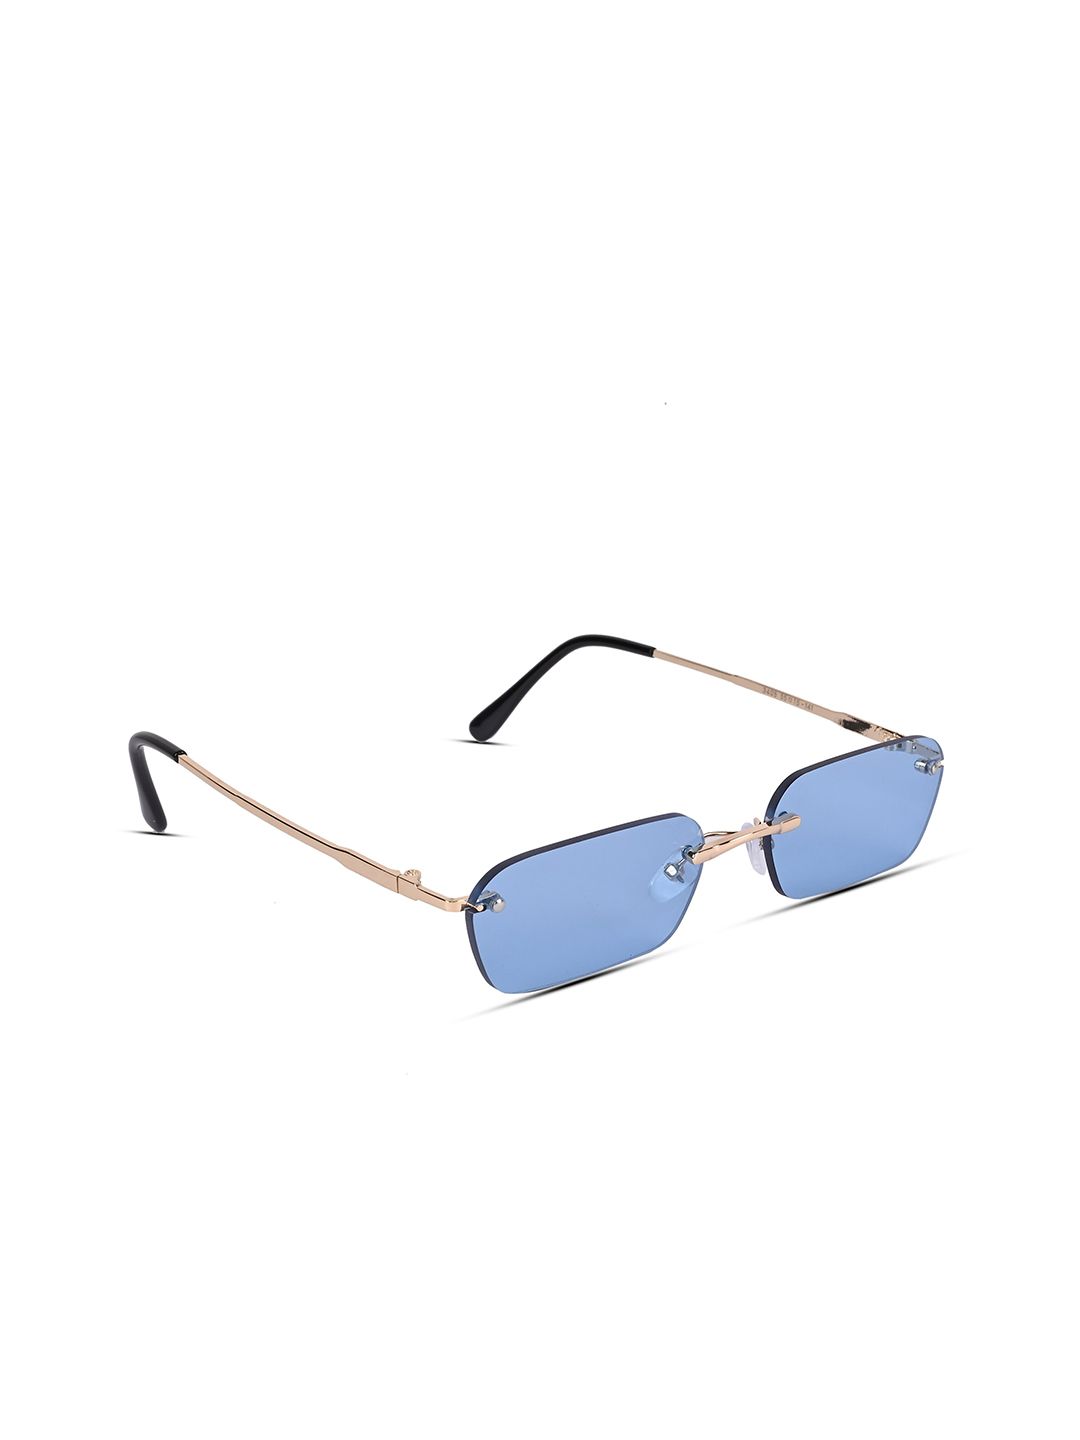 Voyage Unisex Blue Lens & Gold-Toned Rectangle Sunglasses with UV Protected Lens Price in India